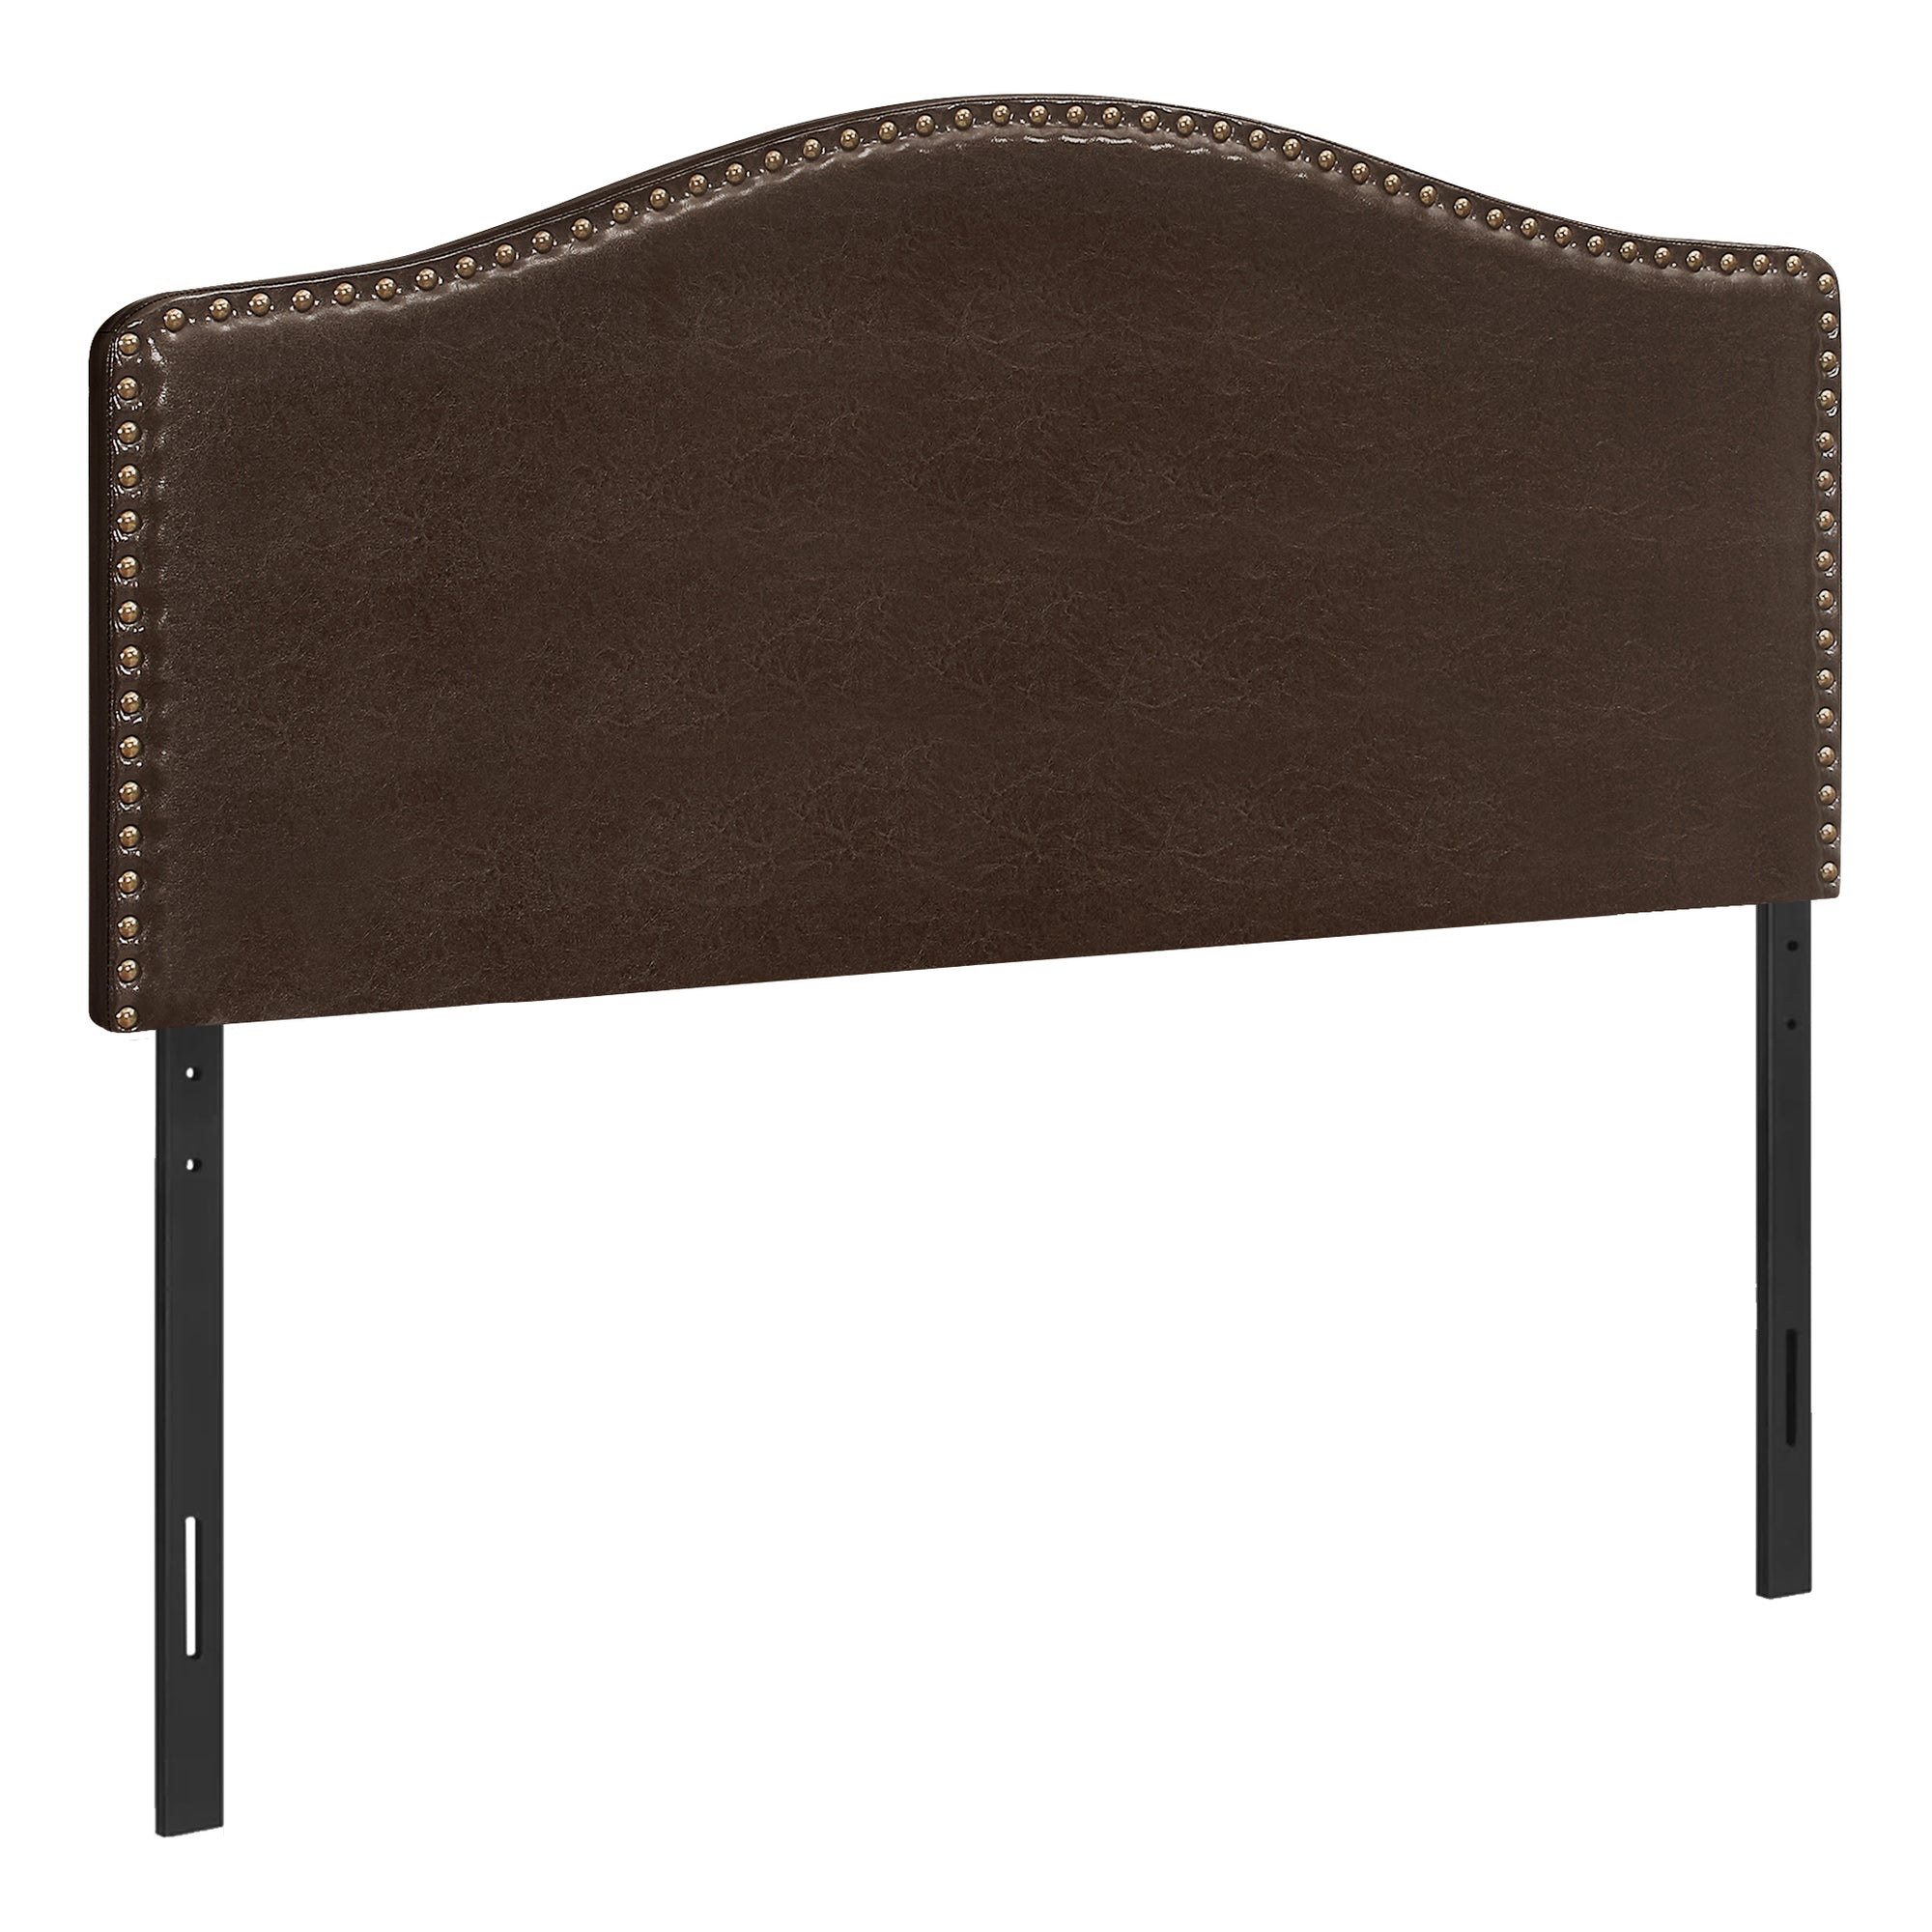 MN-476010F    Headboard, Bedroom, Full Size, Upholstered, Leather Look, Wooden Frame, Dark Brown, Black, Contemporary, Modern